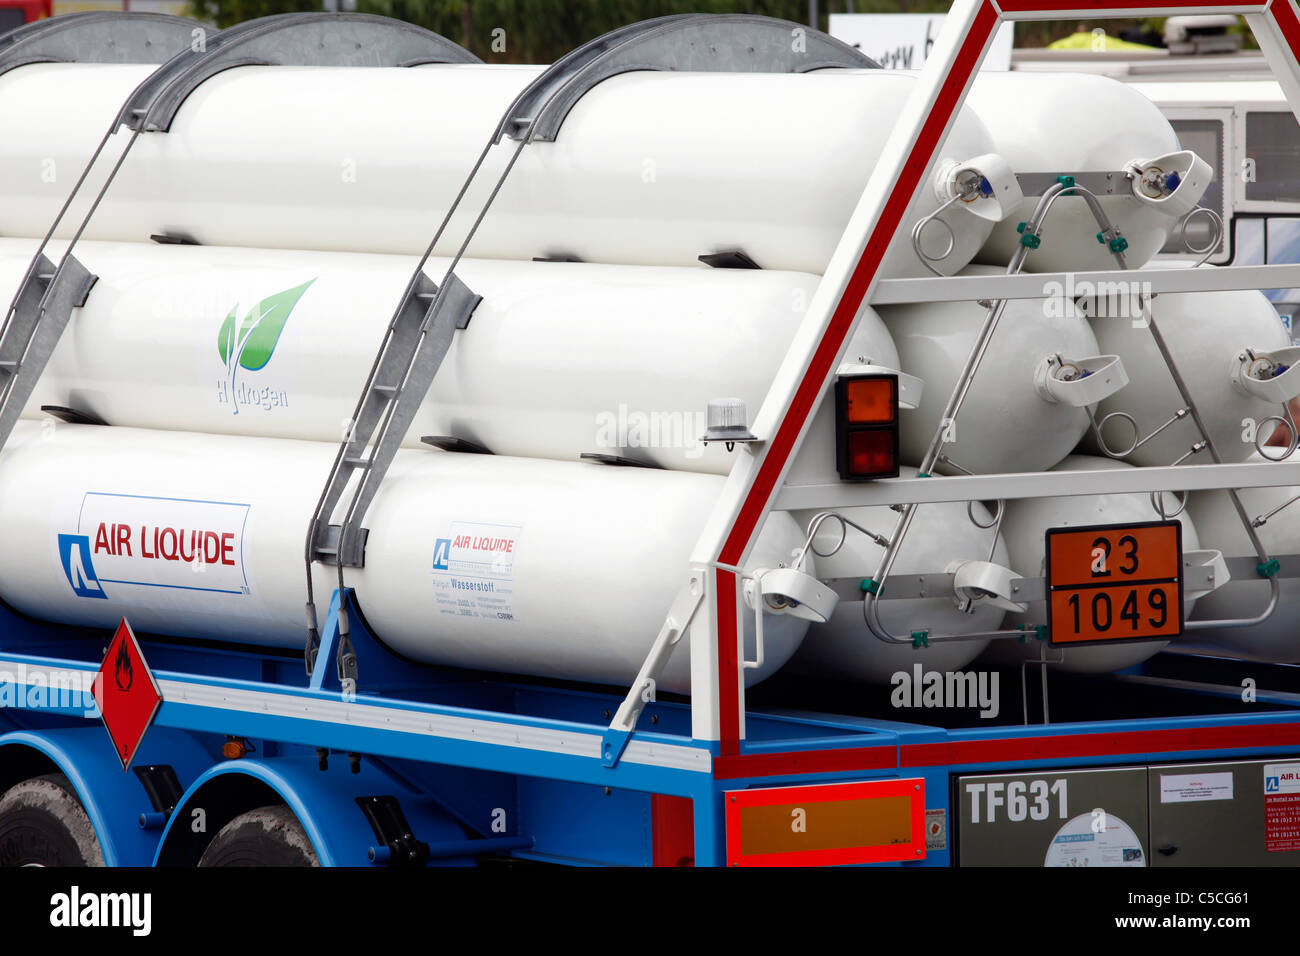 Hydrogen tanks. For fueling of hydrogen fuel cell vehicles. Mobile service station. High pressure gas bottle. Stock Photo